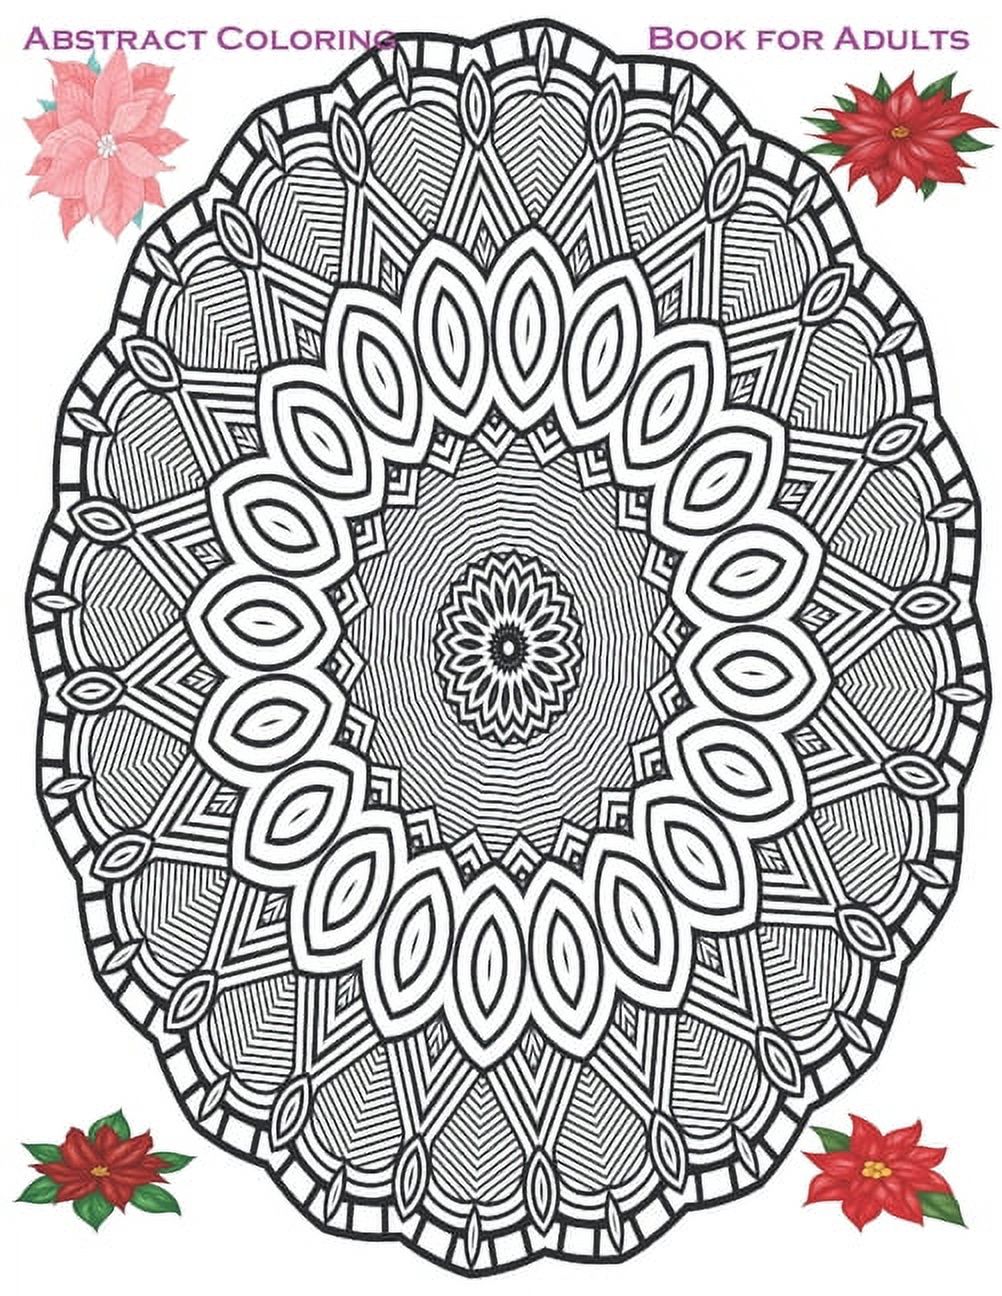 Abstract Coloring Book for Adults: coloring pages for adults coloring book.  Includes beautiful designs hand drawn,88 pages size 8.5*11 (Paperback)